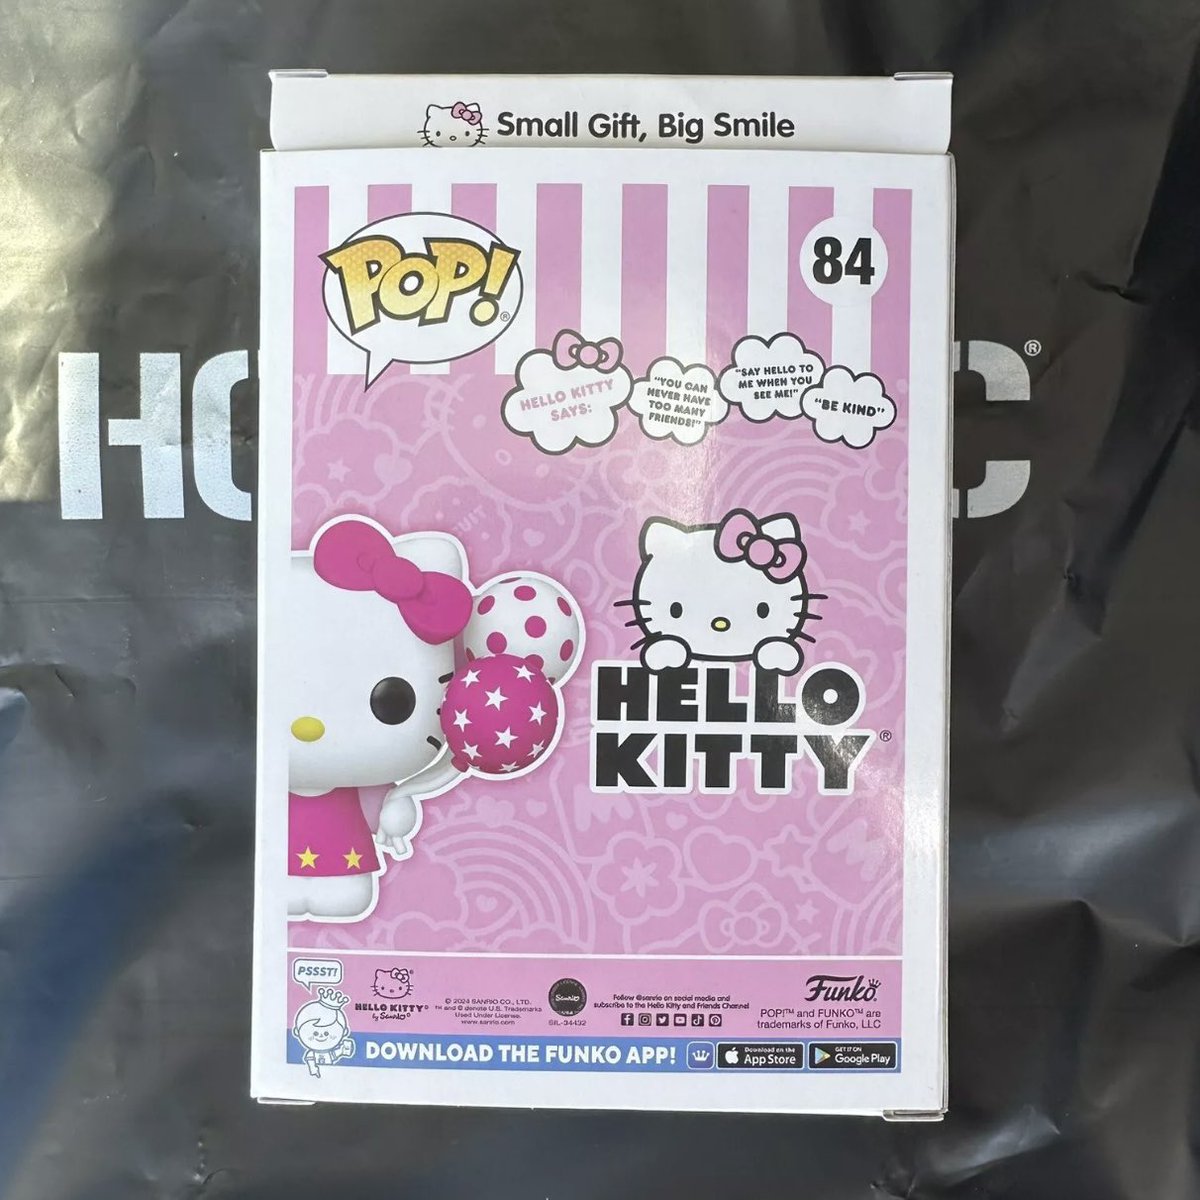 Small Gift, Big Smile! A new Hot Topic Exclusive Hello Kitty with Balloons Funko Pop! figure is hitting stores now and online soon!

📸 @eBay 

#HelloKitty #HelloKitty50th #Funko #FunkoPop #FunkoPops #FunkoPopVinyl #Pop #PopVinyl #FunkoCollector #Collectible #Collectibles #Toy…